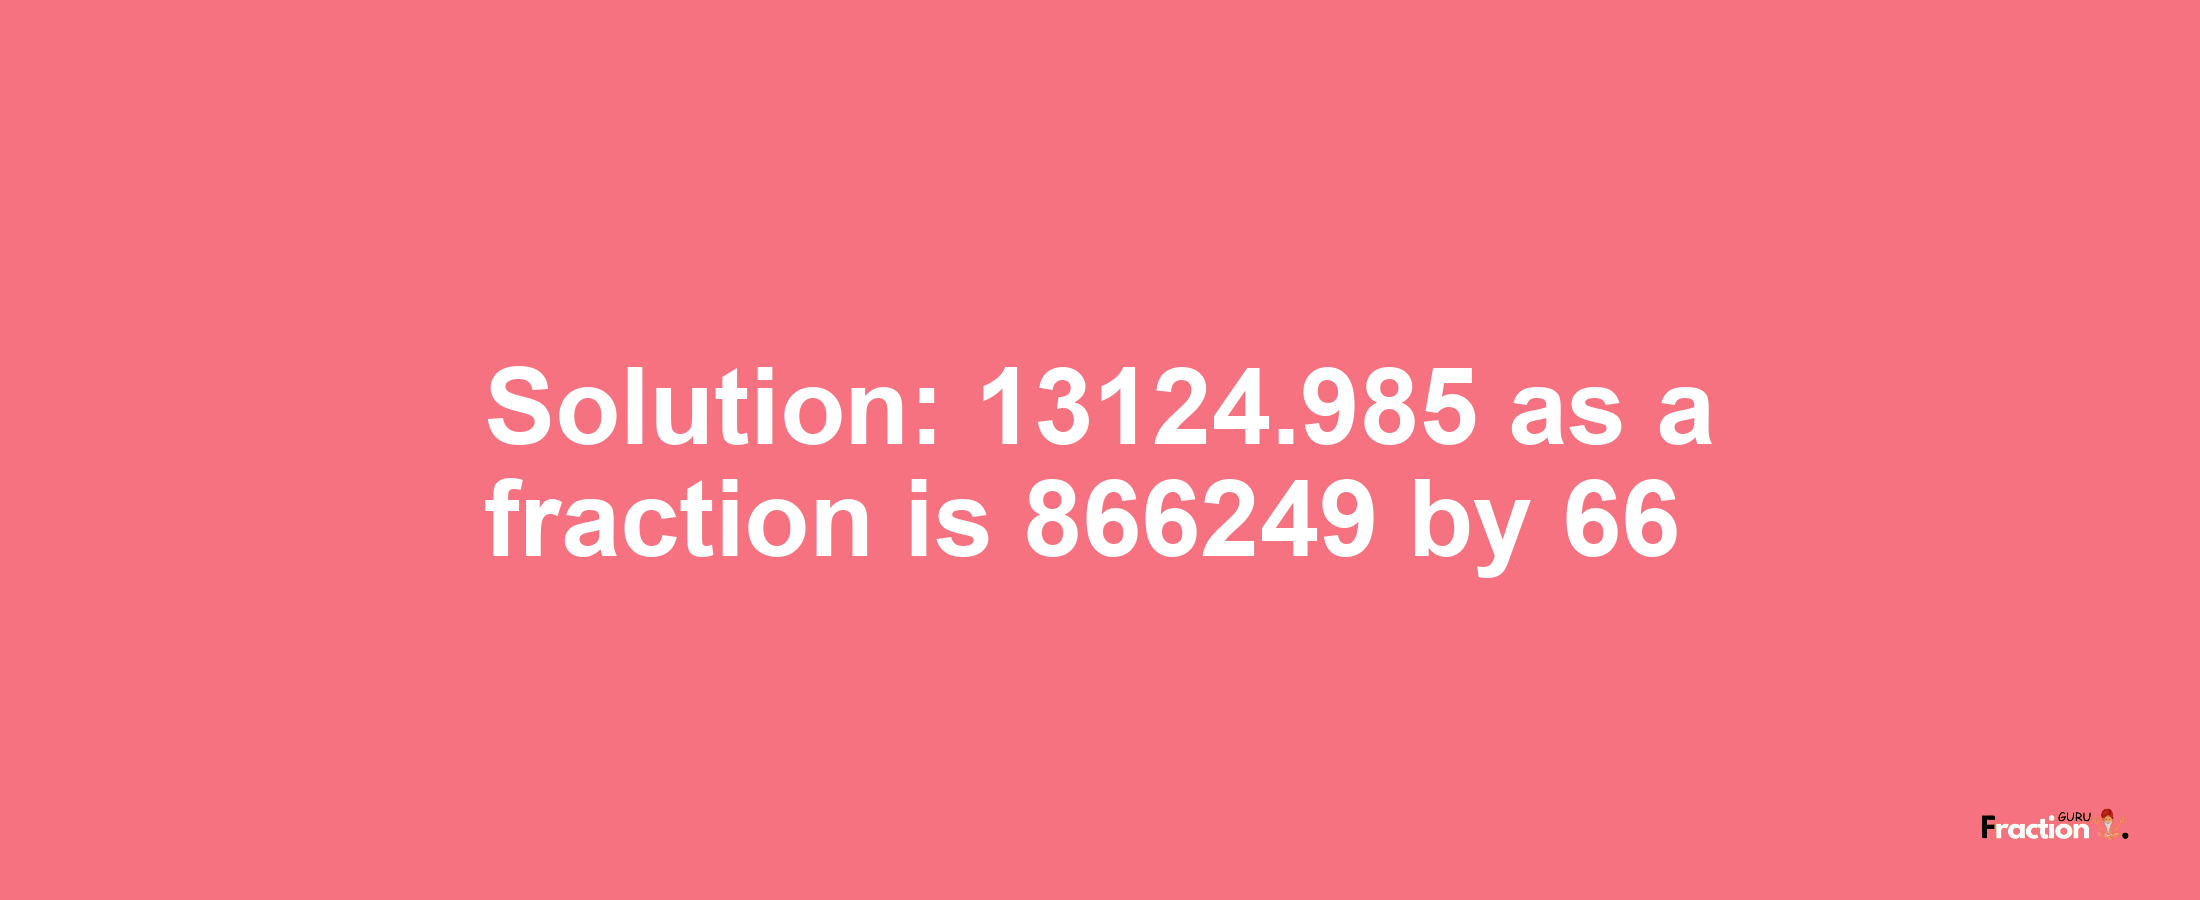 Solution:13124.985 as a fraction is 866249/66